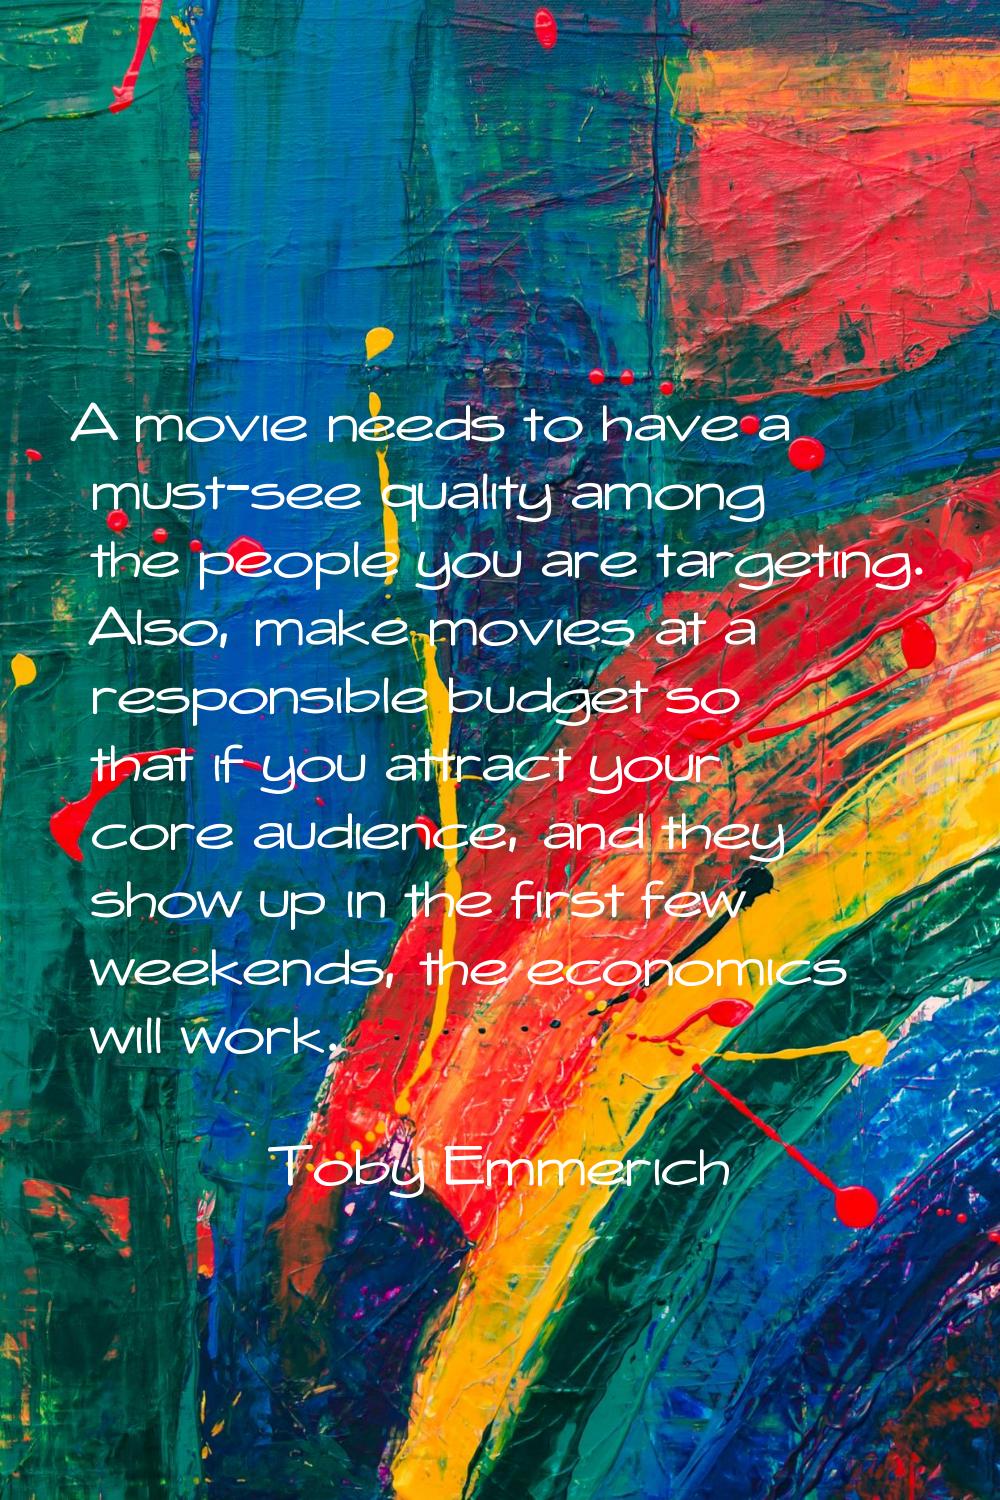 A movie needs to have a must-see quality among the people you are targeting. Also, make movies at a